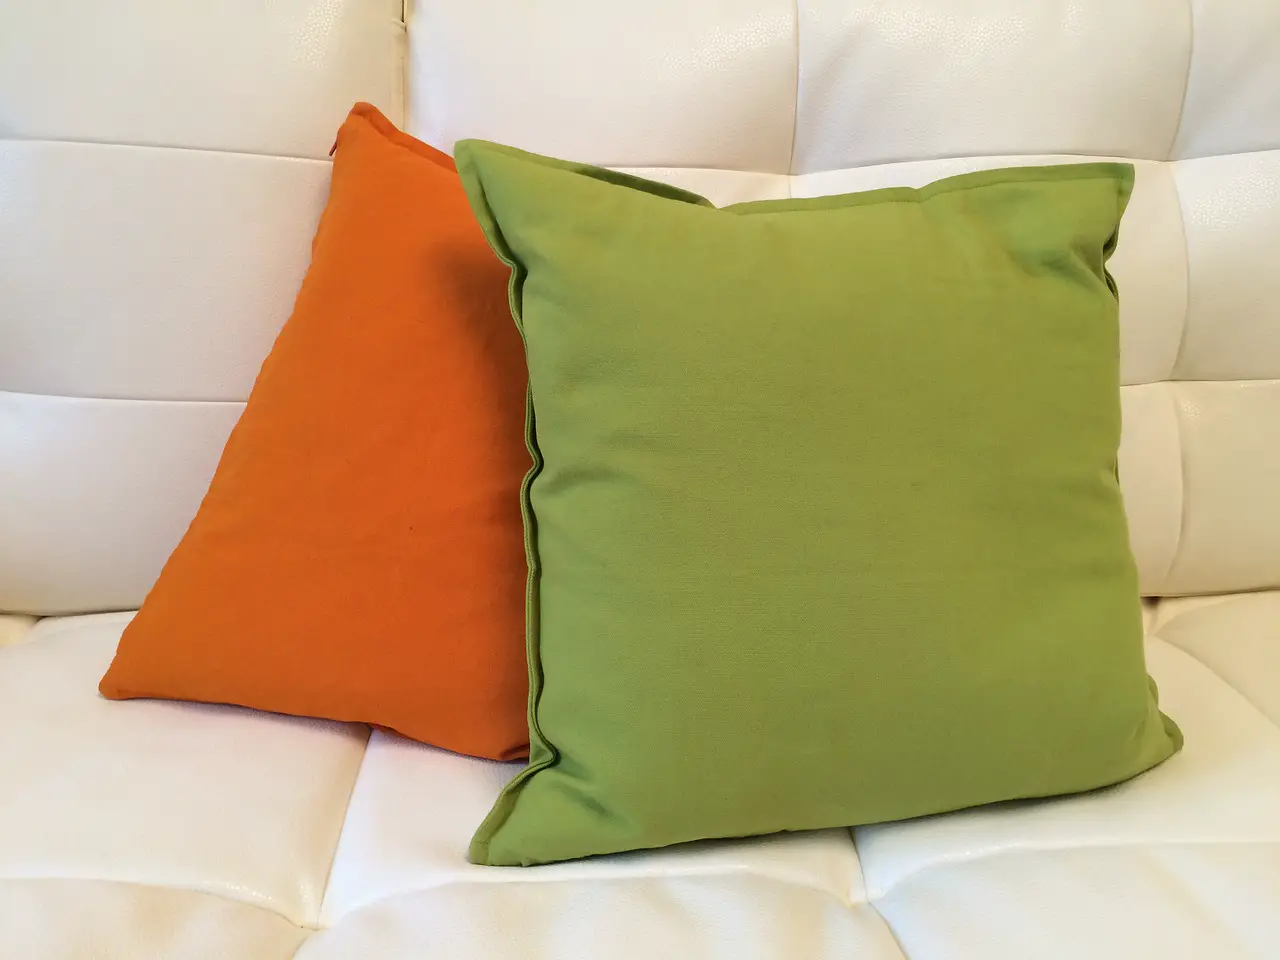 How to sanitize pillows